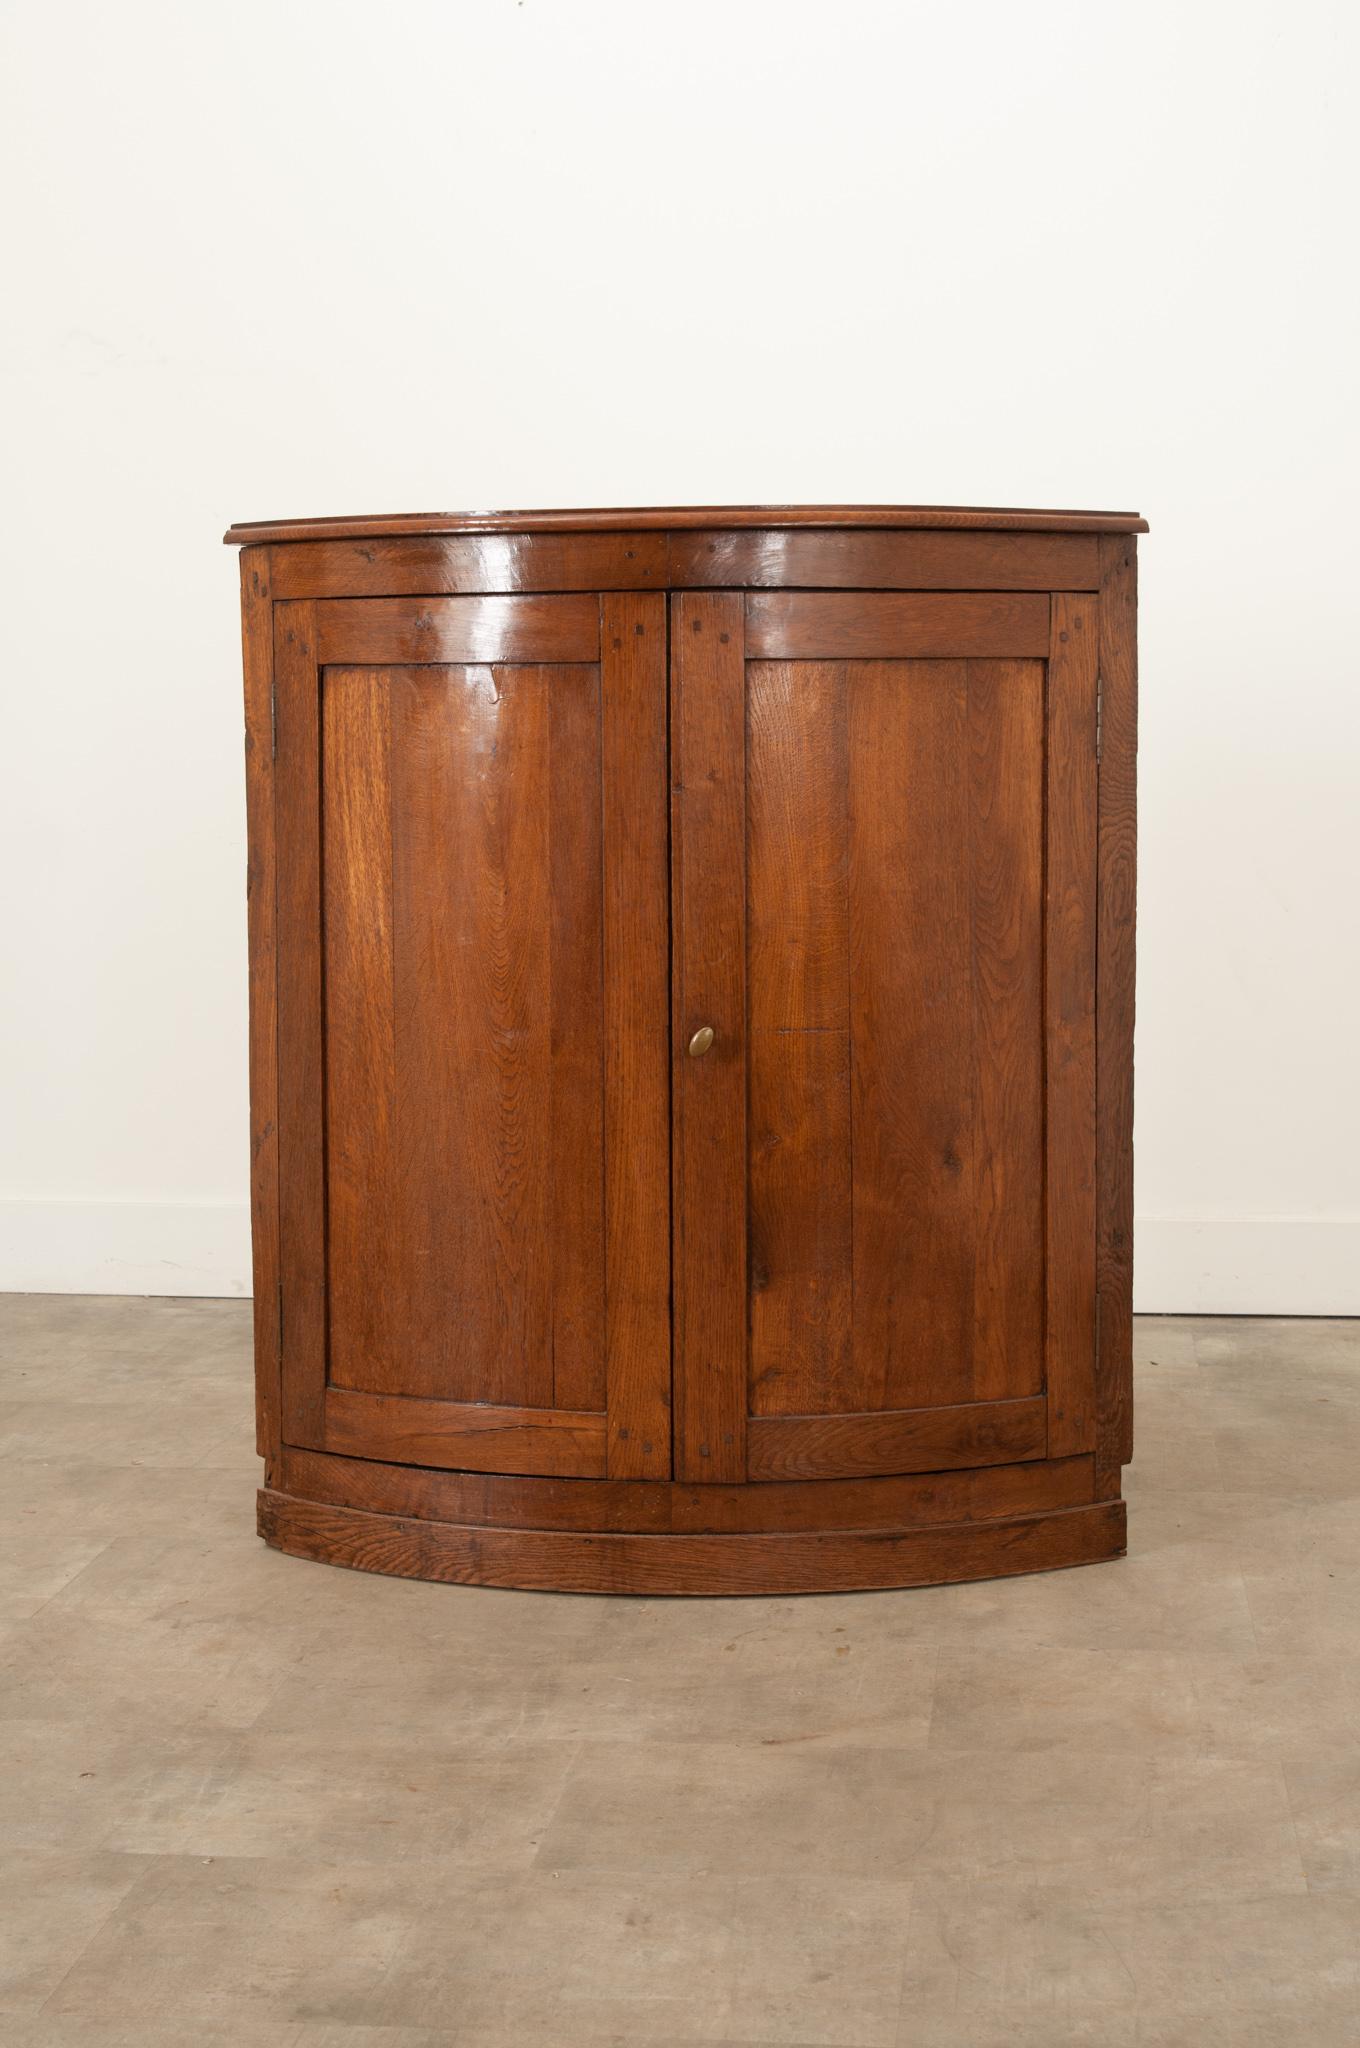 French Provincial French Solid Oak Demilune Corner Cabinet